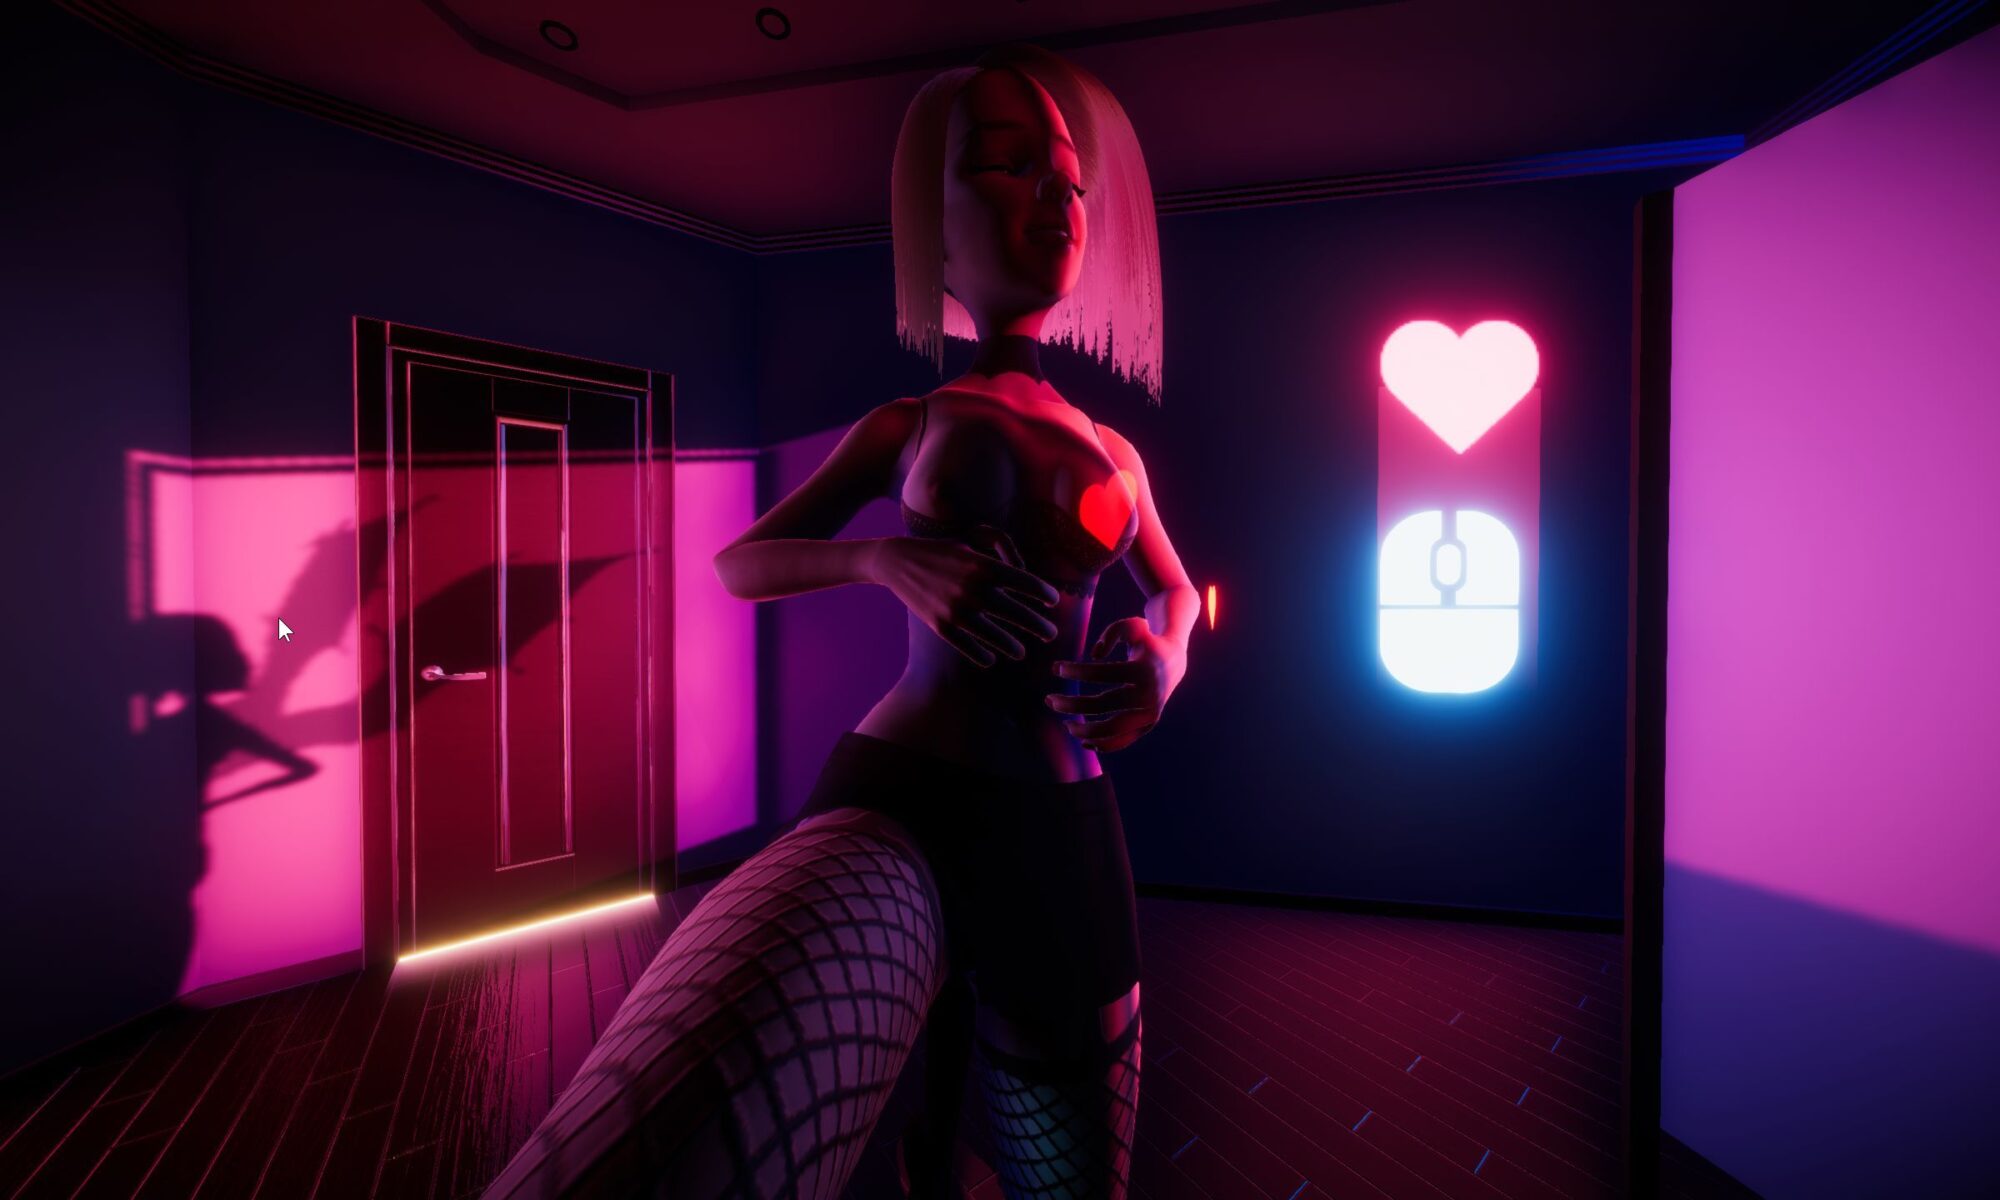 Vr porn games that connect to sex toys